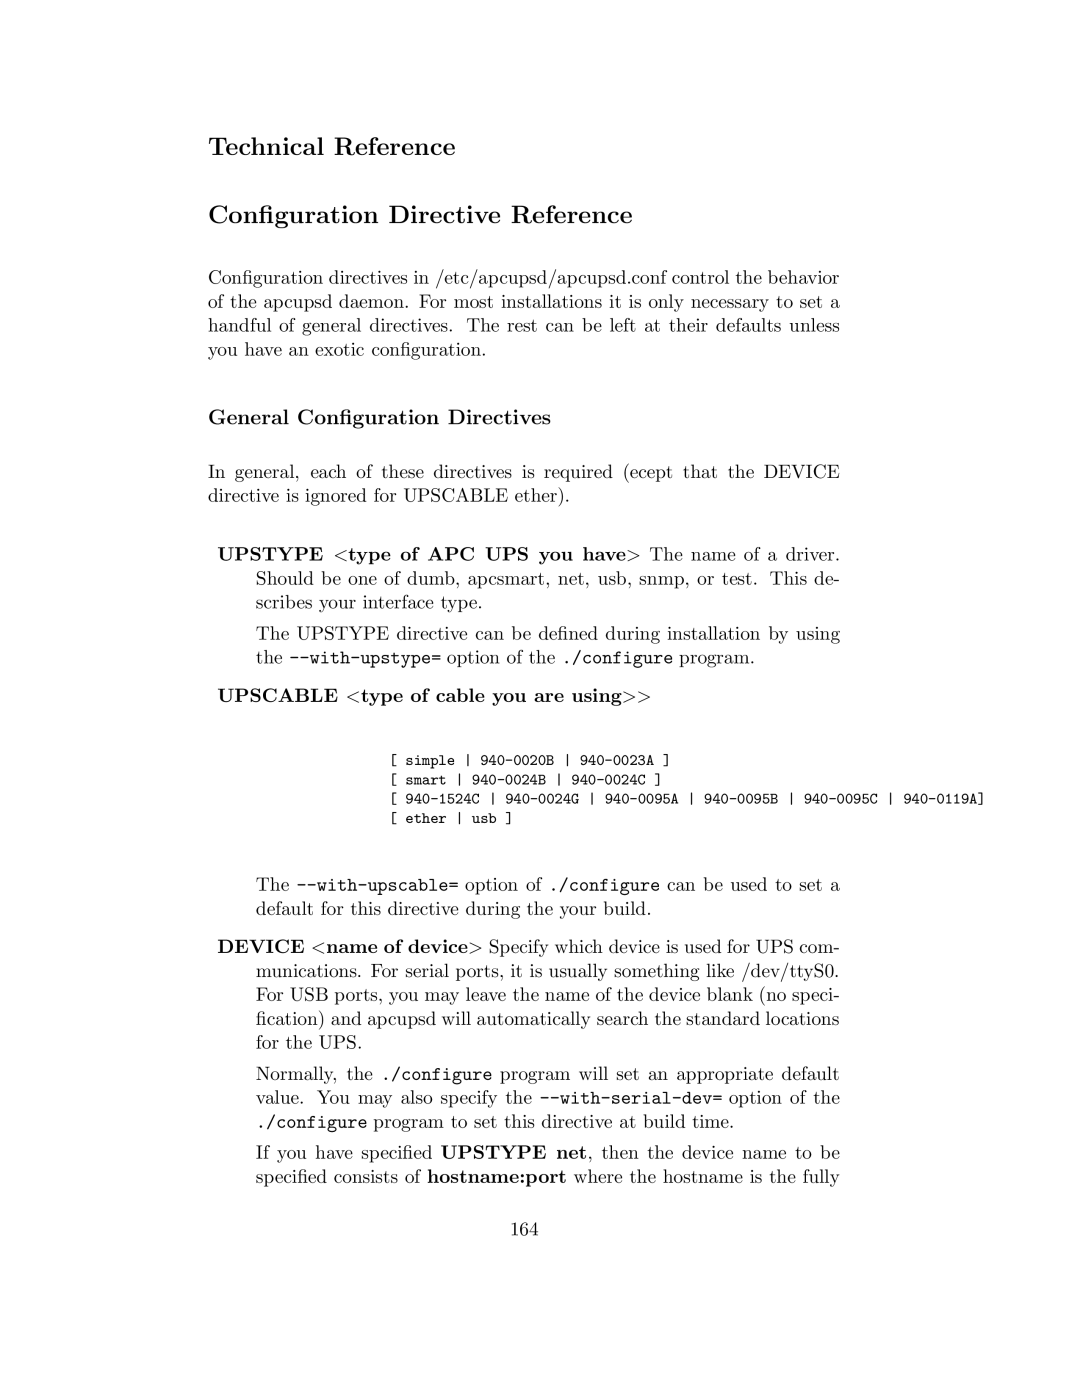 APC UPS control system manual Technical Reference Conﬁguration Directive Reference, General Conﬁguration Directives 